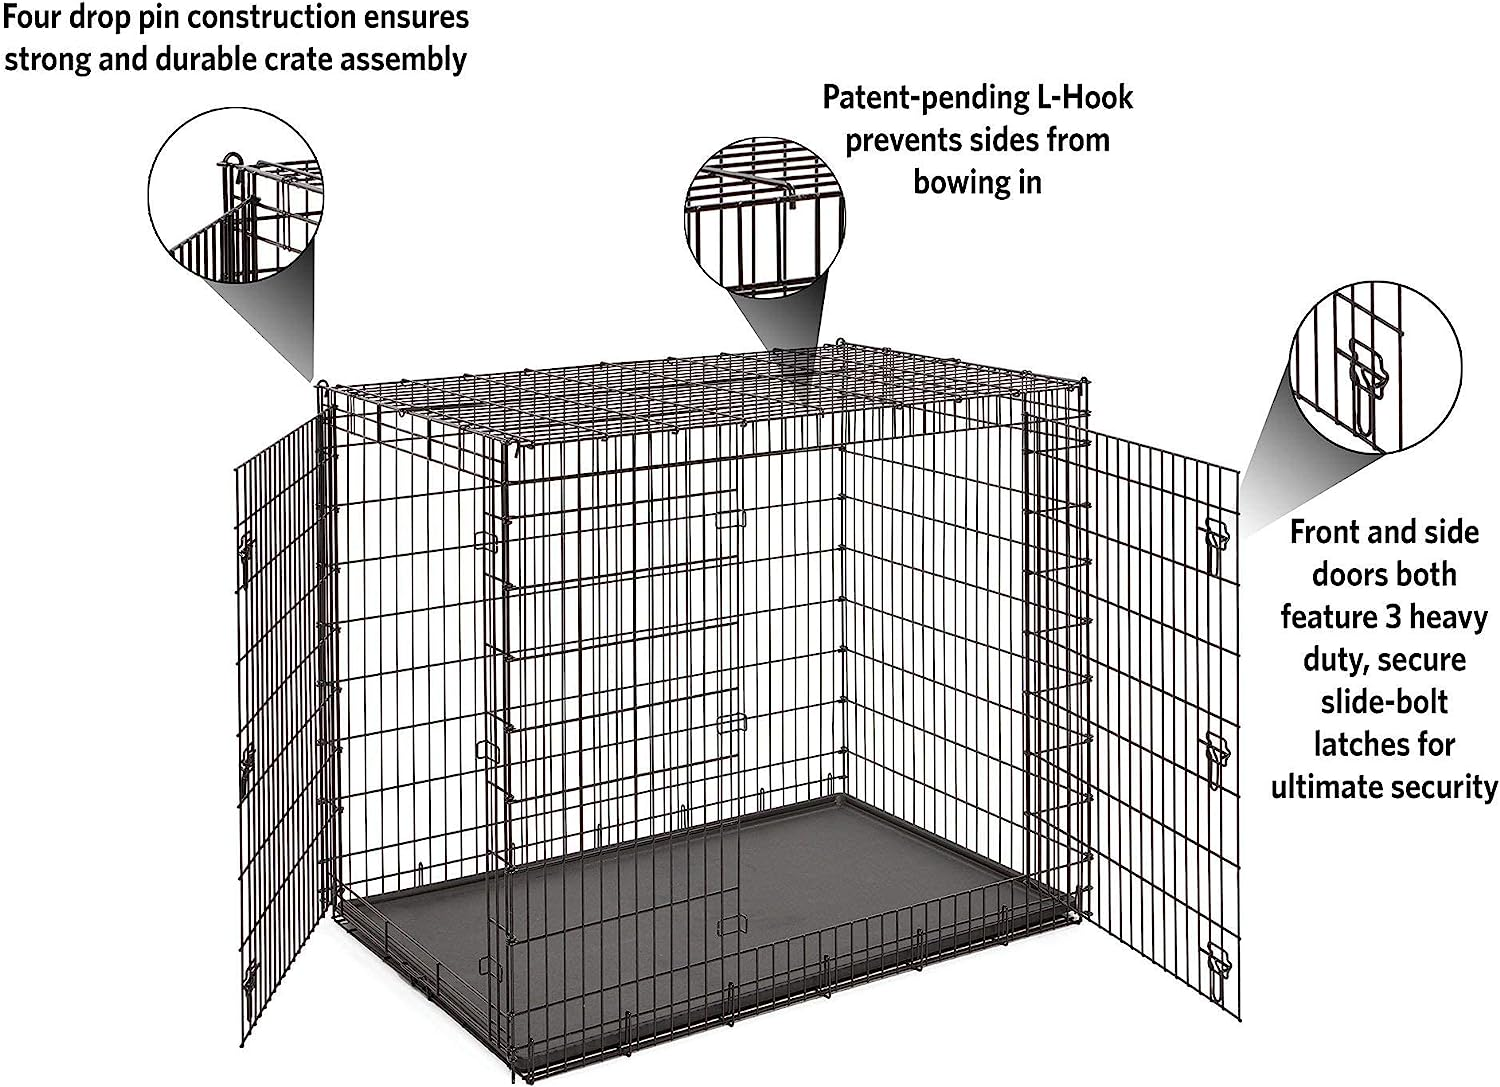 Find Calm and Comfort: The Best High Anxiety Dog Crate On The Market